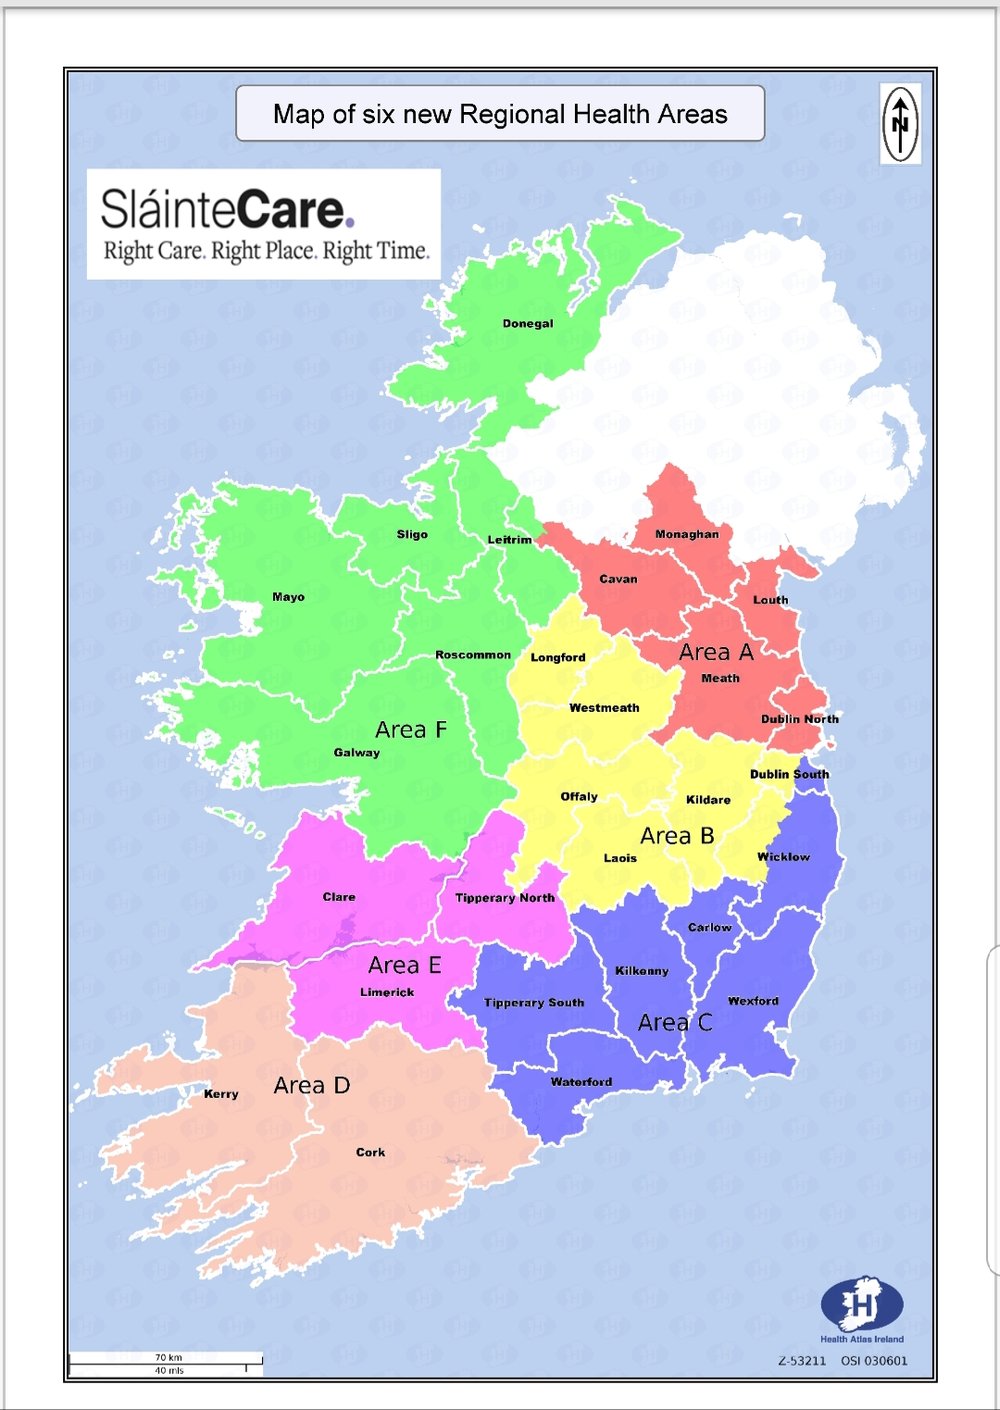 Once established, the six regional bodies are meant to plan, fund, manage and deliver integrated care in each region.